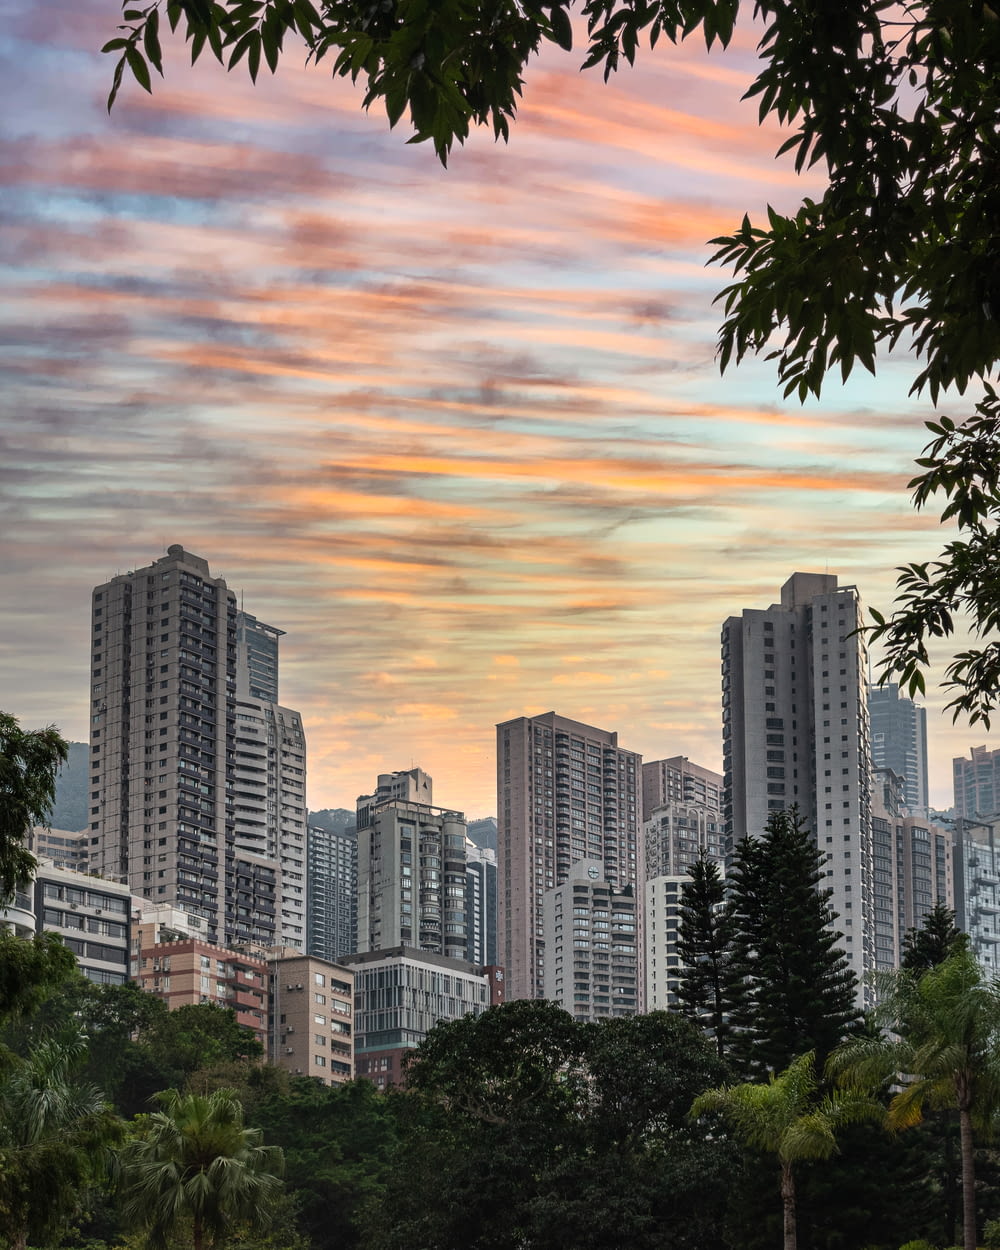 high rise buildings near green trees under cloudy sky during daytime